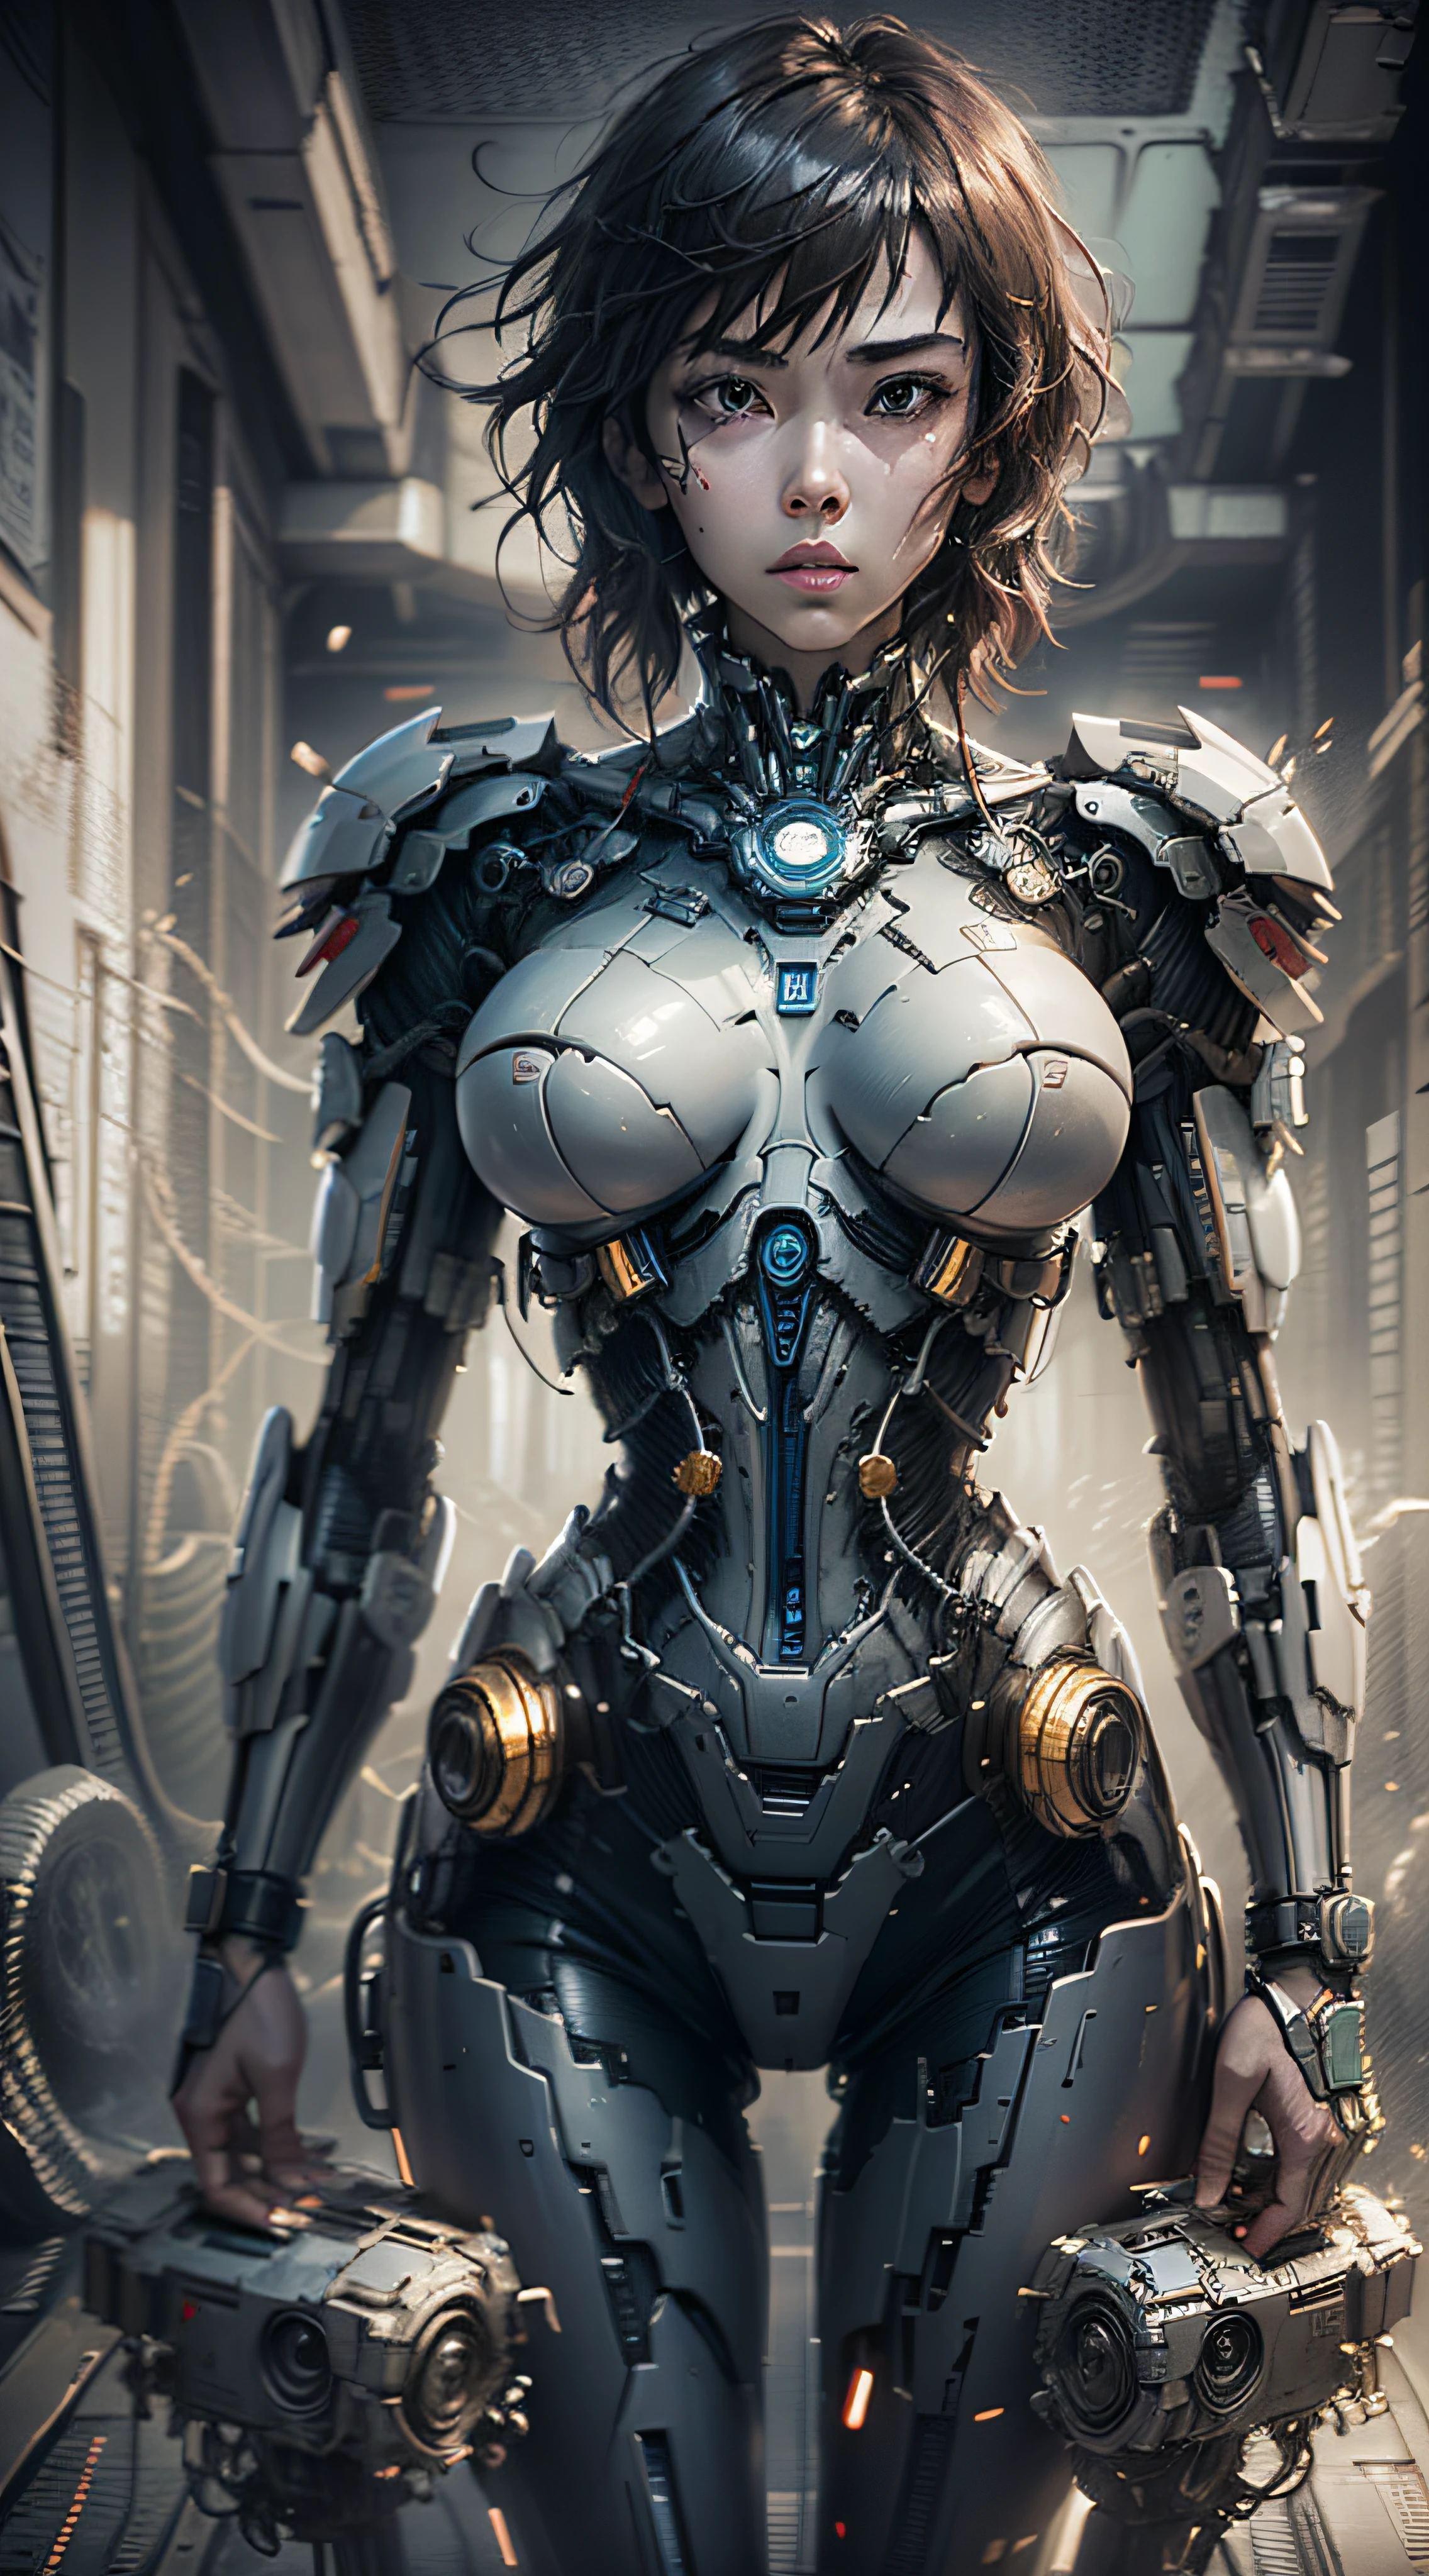 ghost in the shell kusanagi corpo escultural, in a machine with cables and wires connected, future mecha uniform,